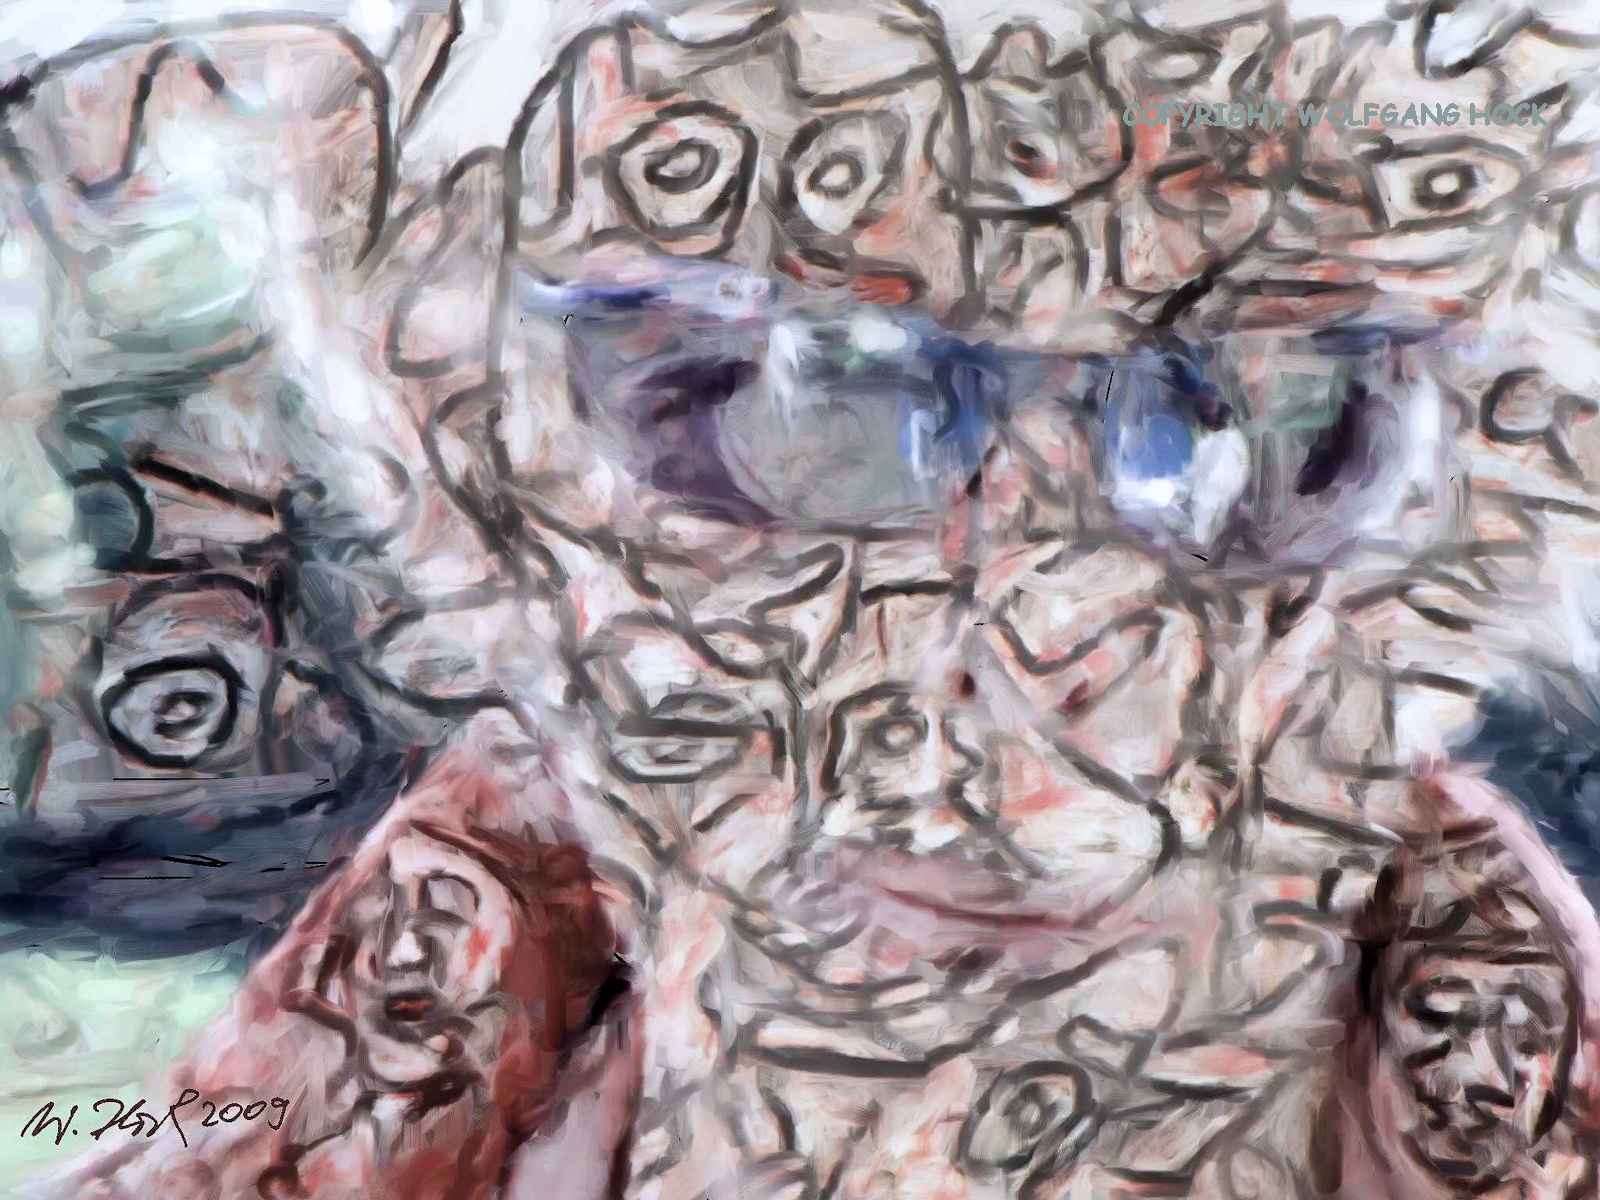 Faces (playing with Jean Dubuffet) 2009   Inkjet printed computer painting on canvas, edition of 5 40 x 30 cm (3 megapixel)